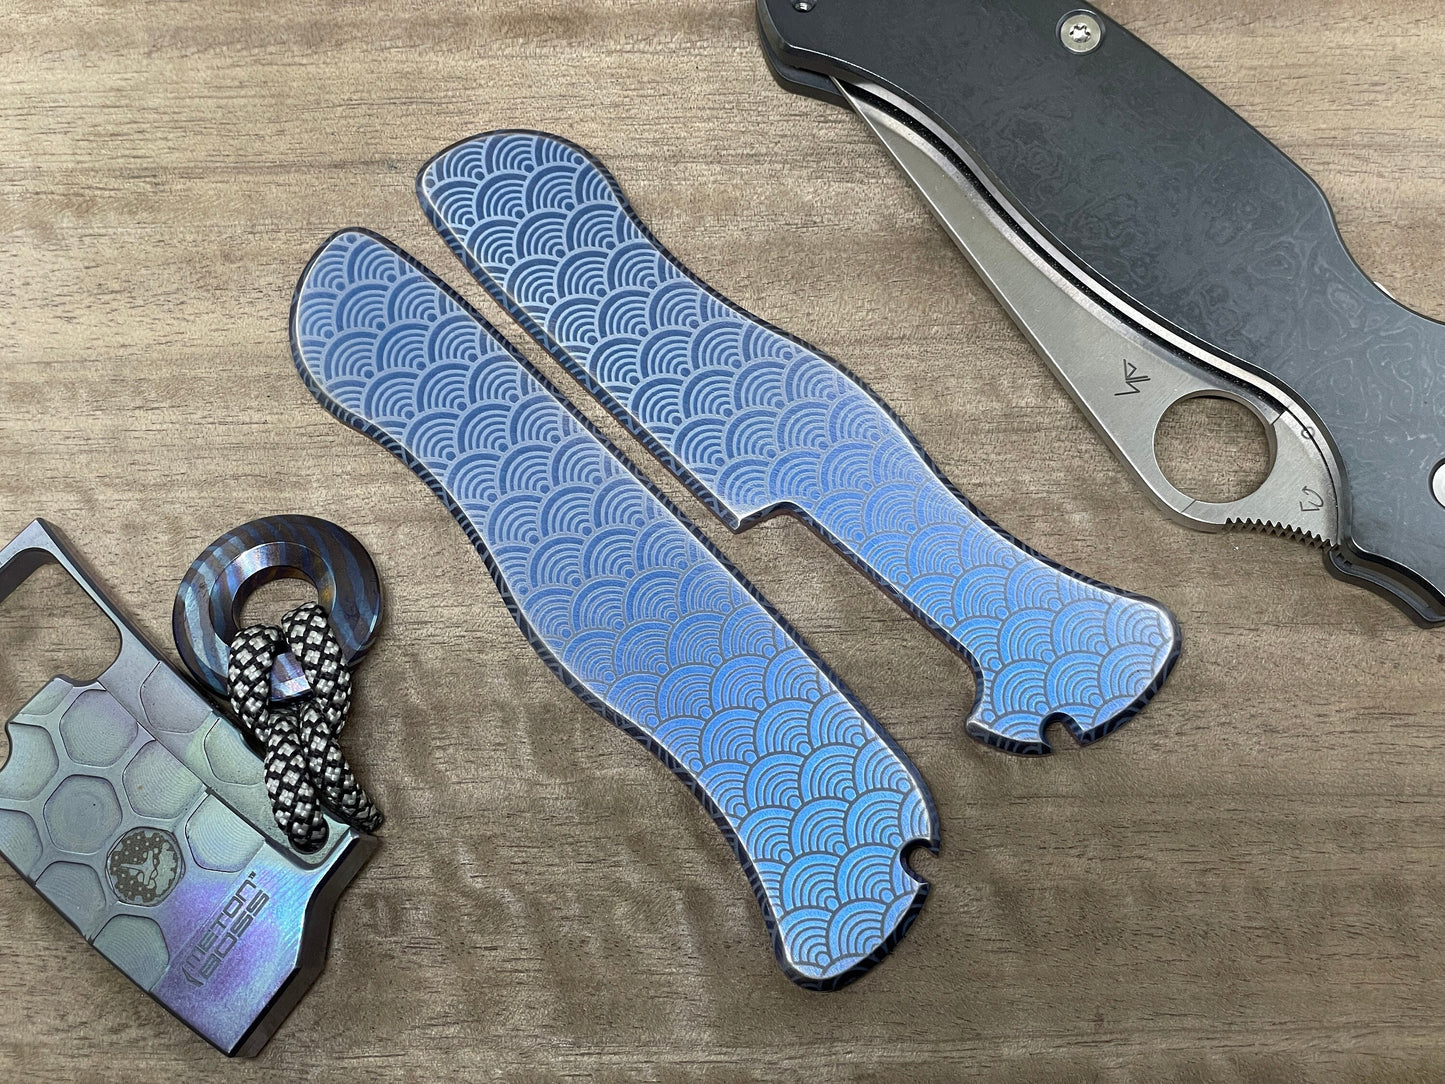 111mm SEIGAIHA Blue ano Brushed Titanium Scales for Swiss Army SAK